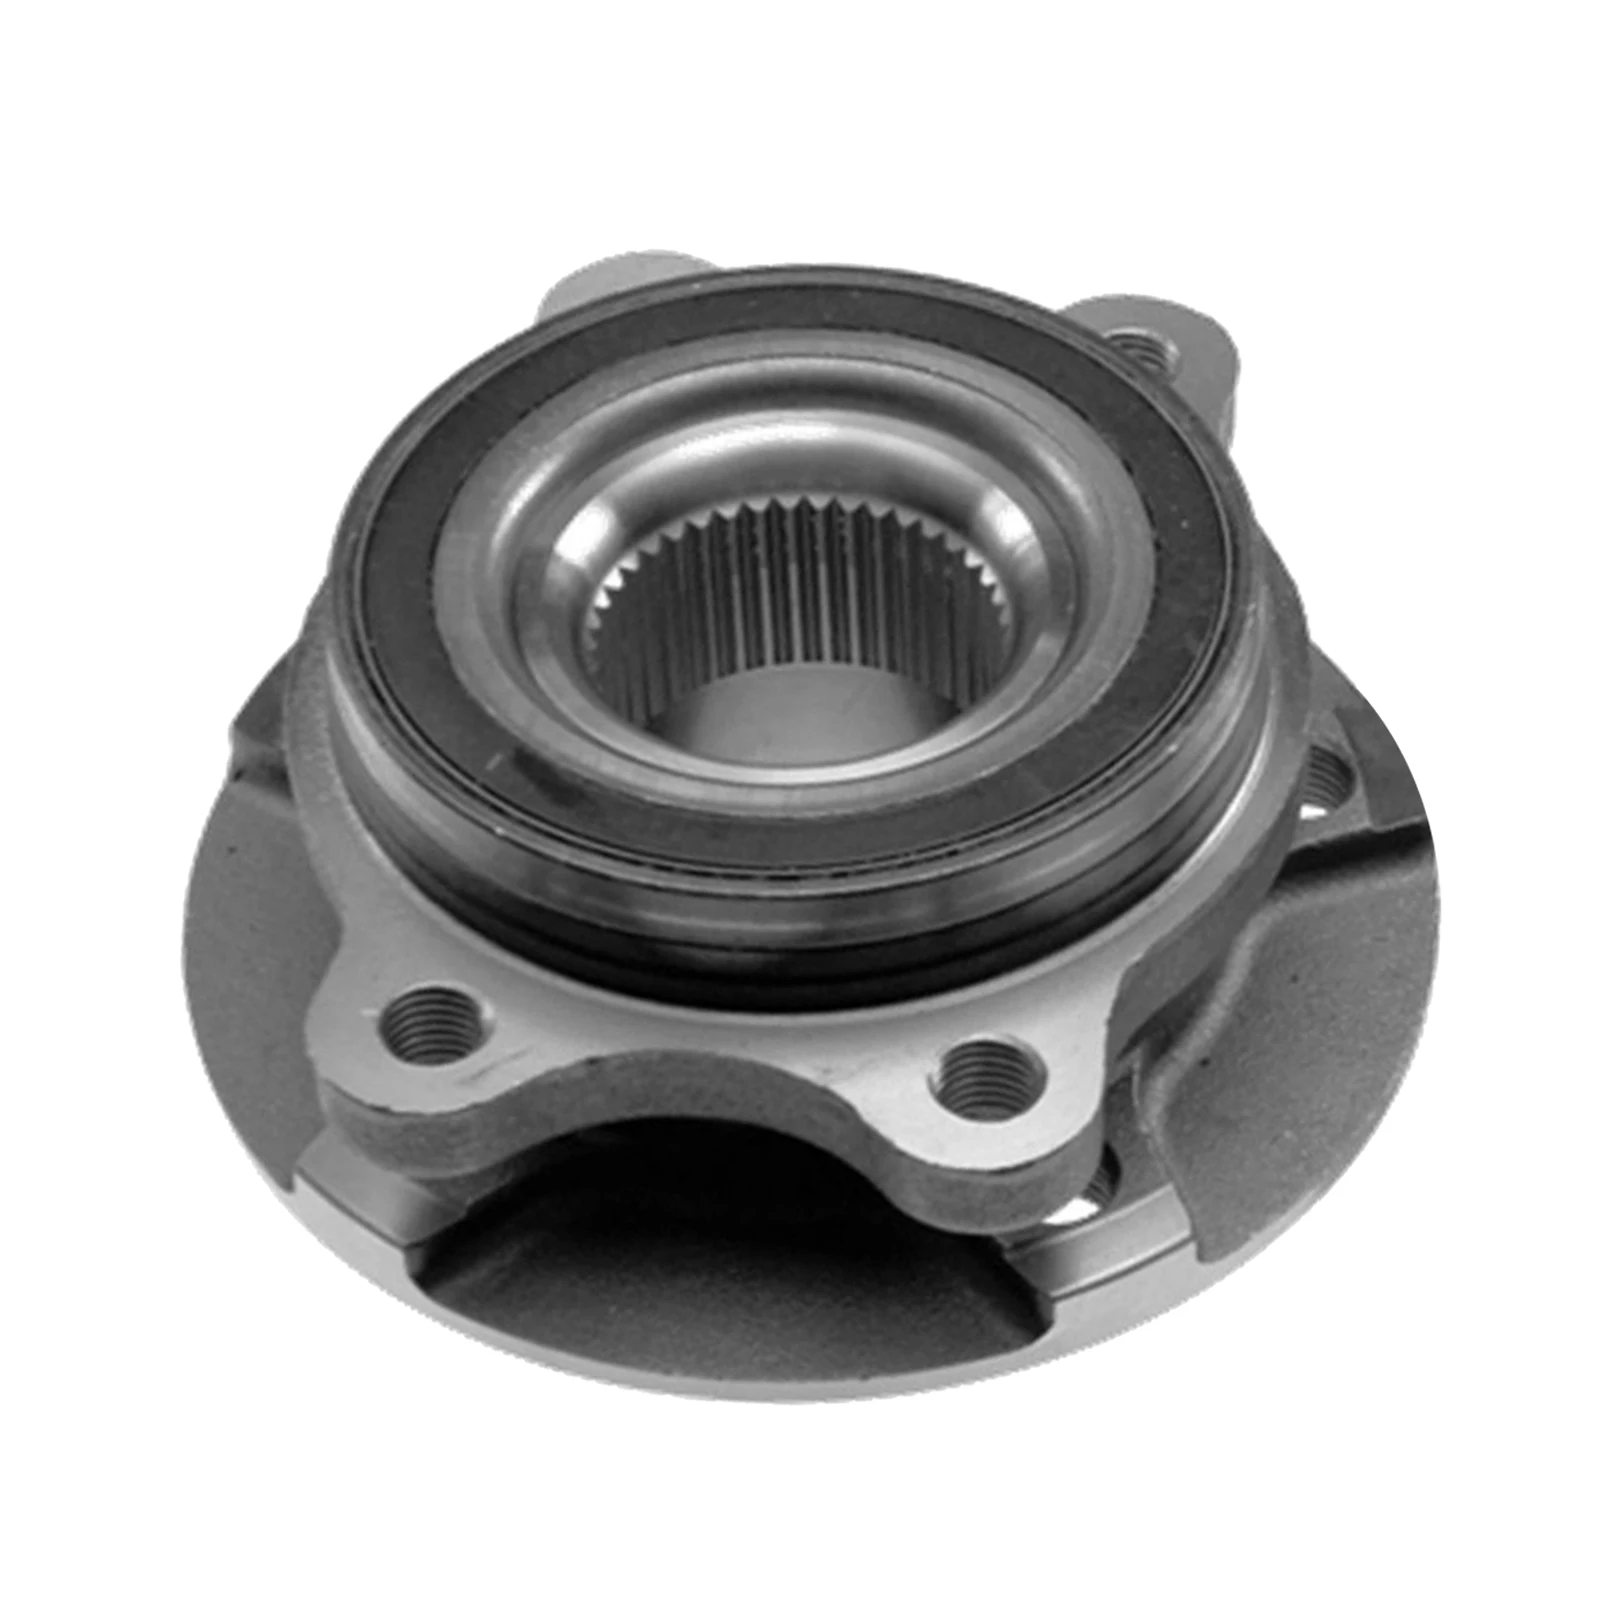 Front Left & Right Wheel Bearing Hub Assembly Fit for Audi A4 2009-2015 A5 2010-2014 A6 2012-2015 2009-2015 2010-2015 2008-2015